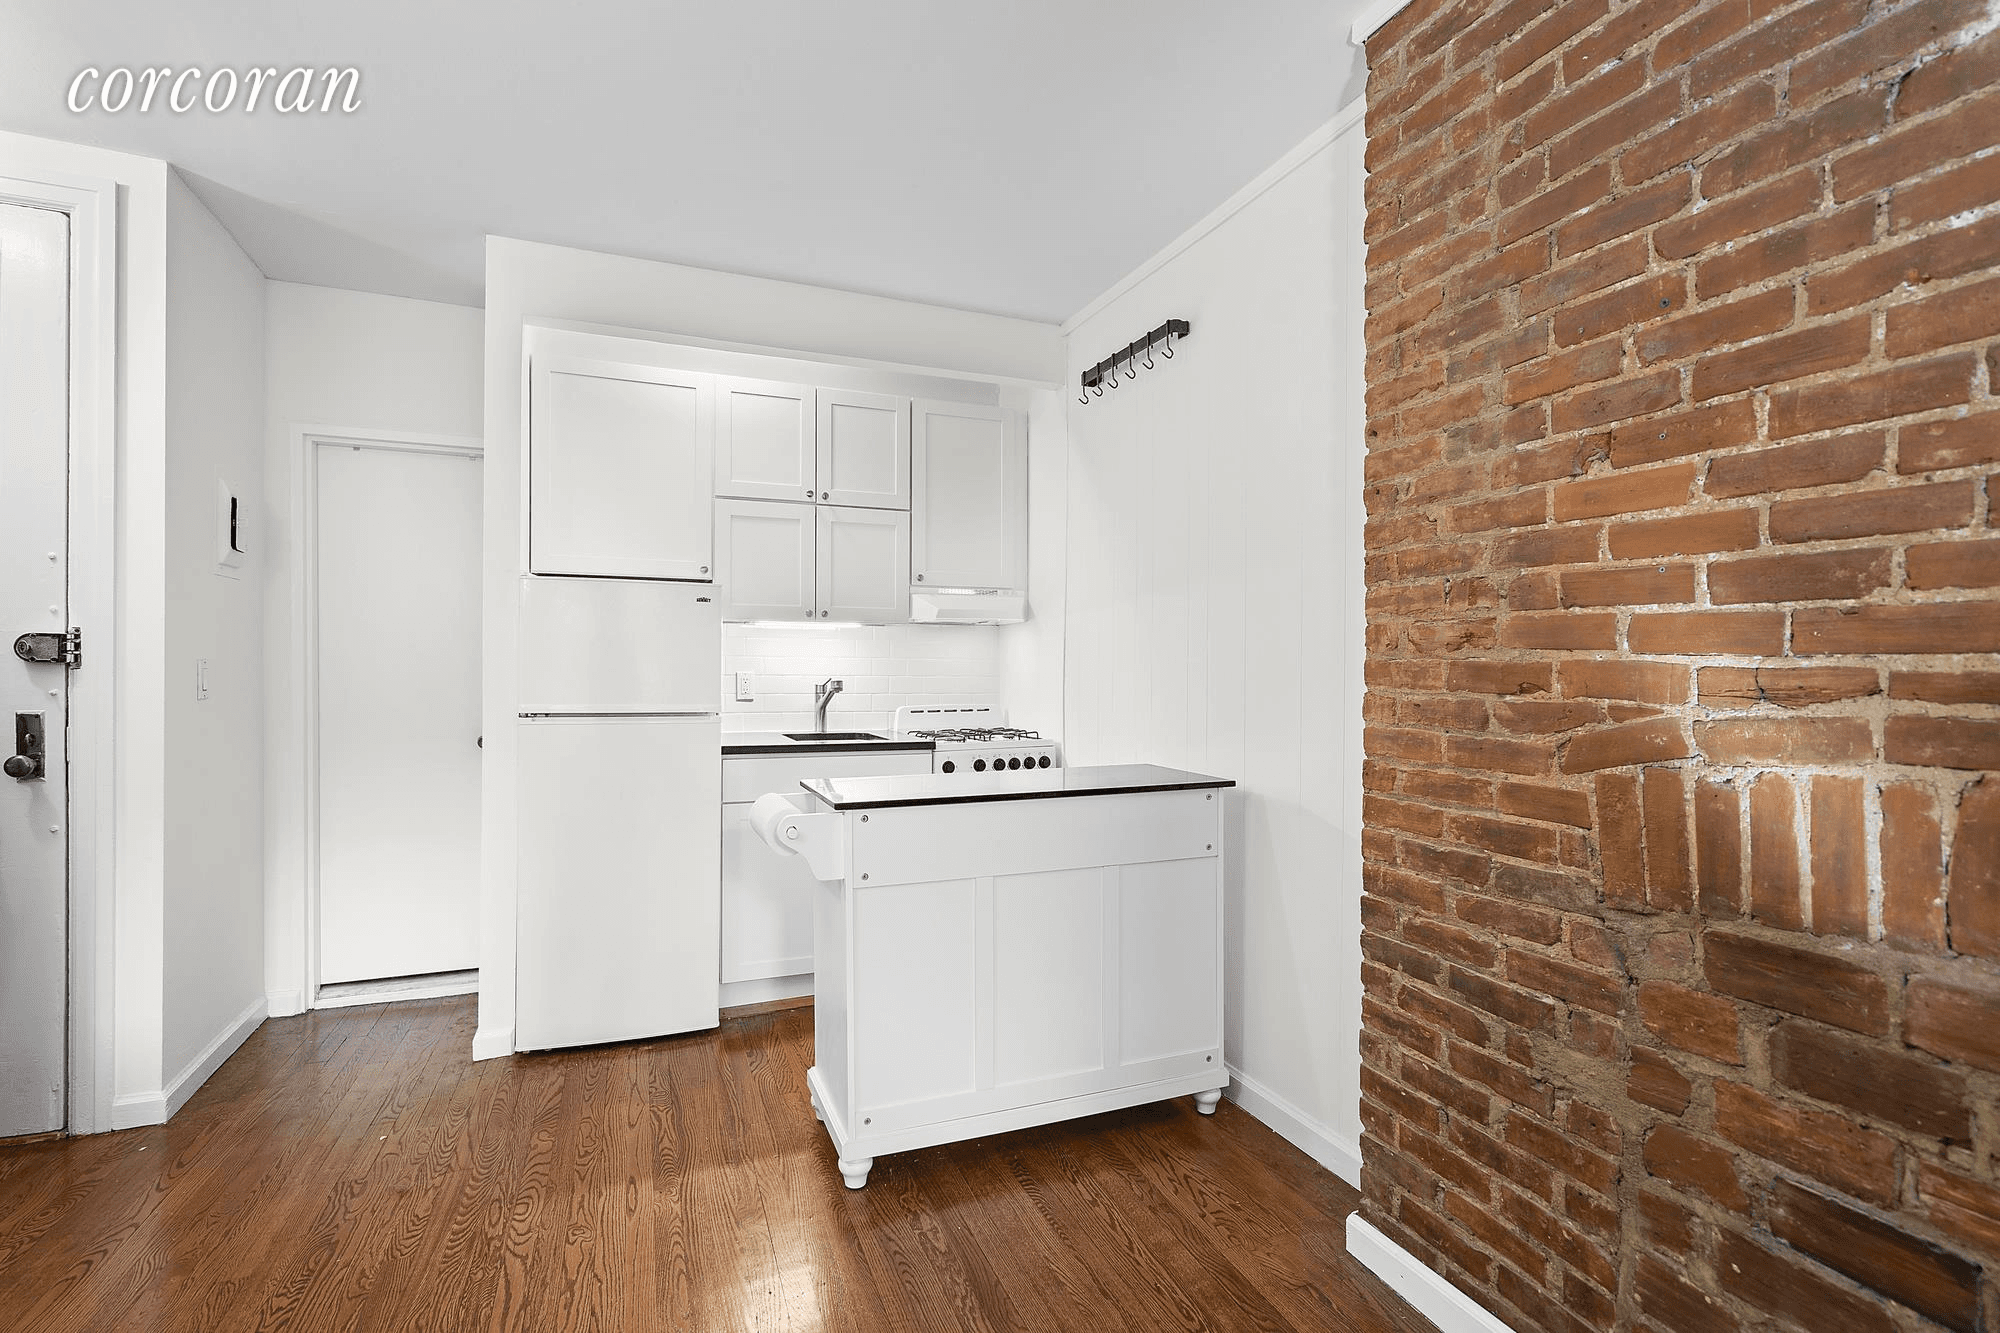 This delightful Upper West Side 1 Bedroom, 1 Bath Apartment is located on a peaceful tree lined block, in a beautiful brownstone.